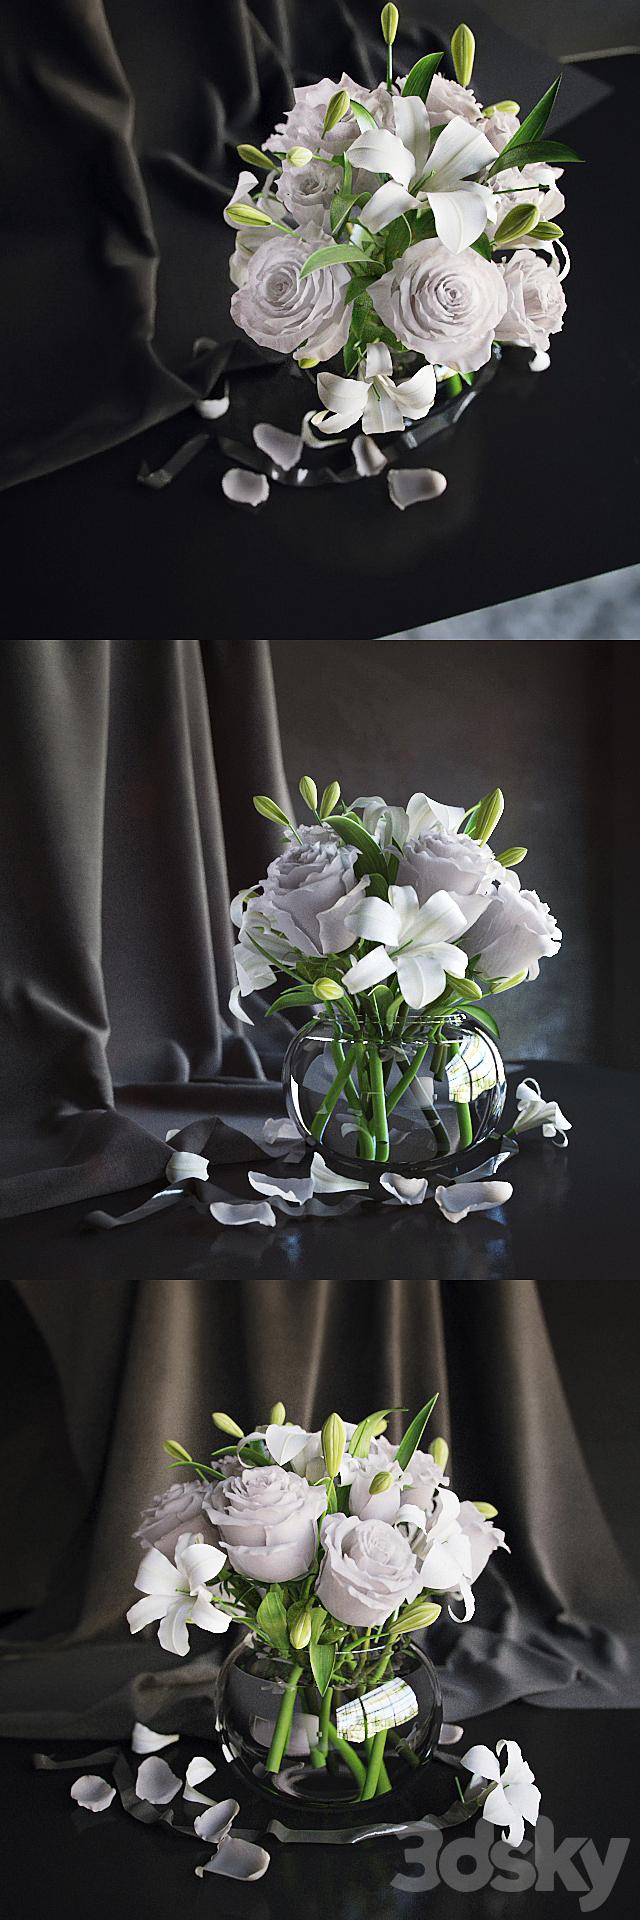 Flowers in a vase 2 3DSMax File - thumbnail 1